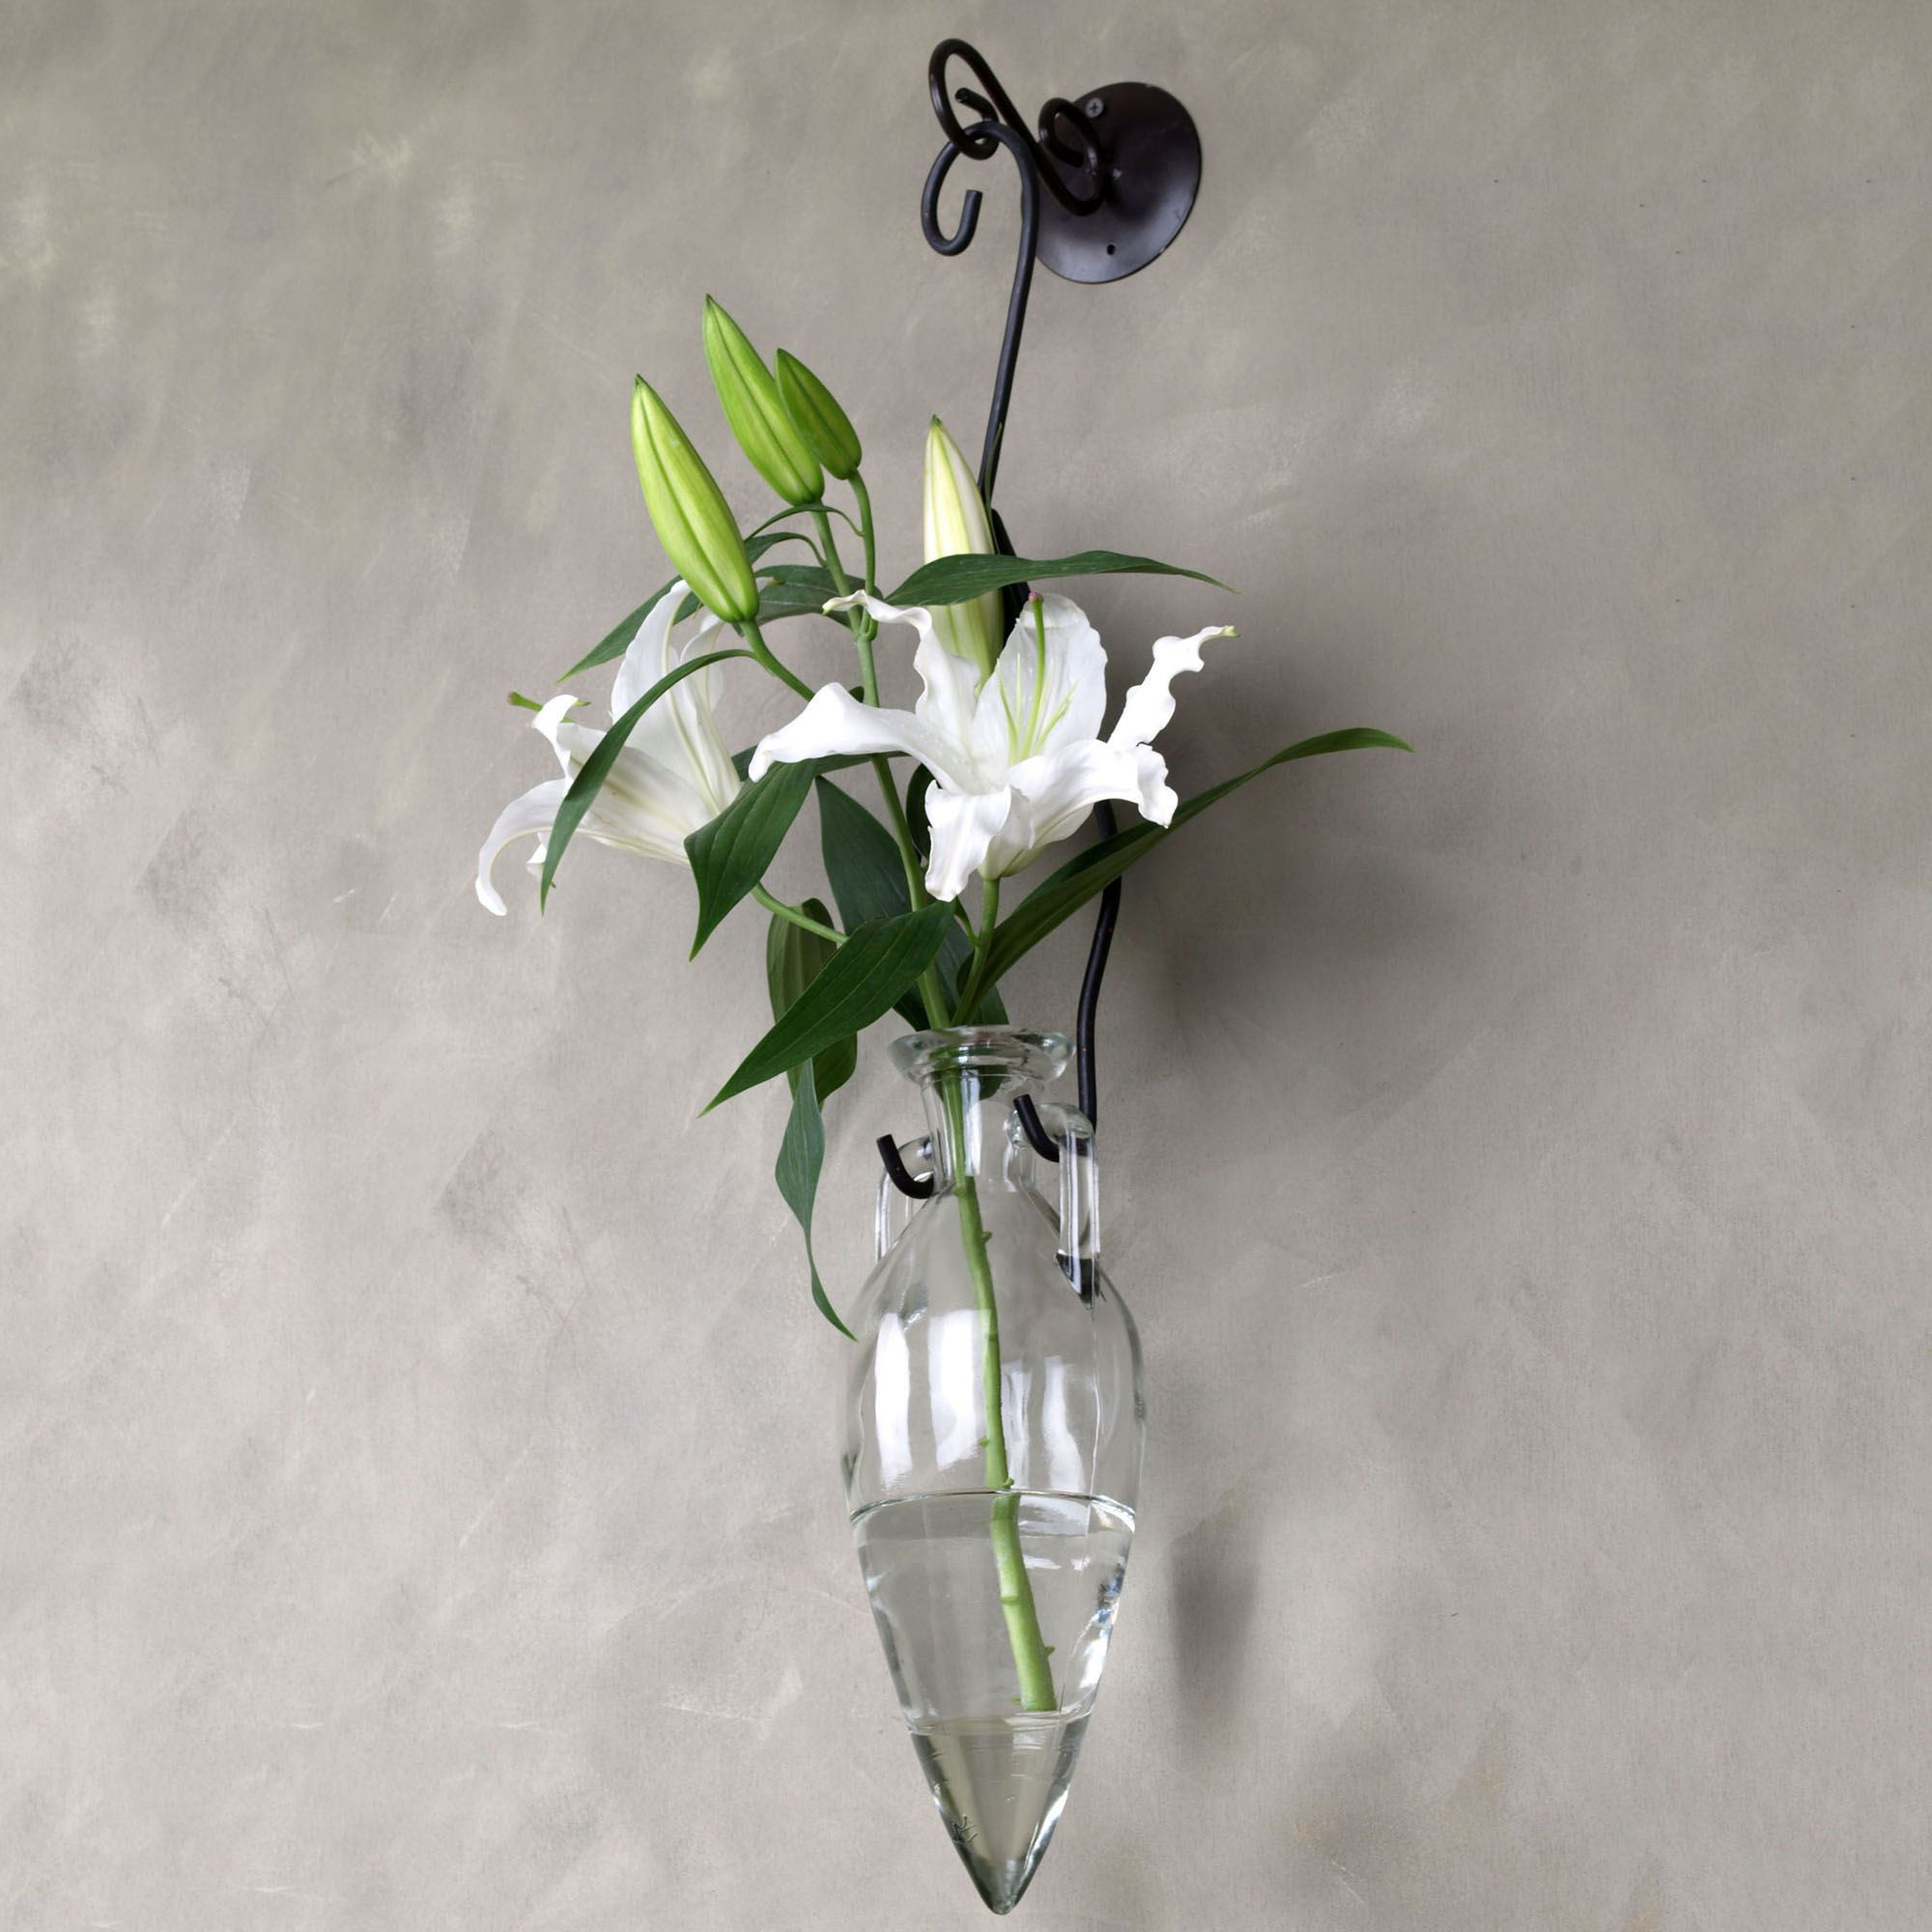 11 Nice Glass Vase with Rope 2024 free download glass vase with rope of metal vase wall decor pics h vases wall hanging flower vase throughout h vases wall hanging flower vase newspaper i 0d scheme wall scheme